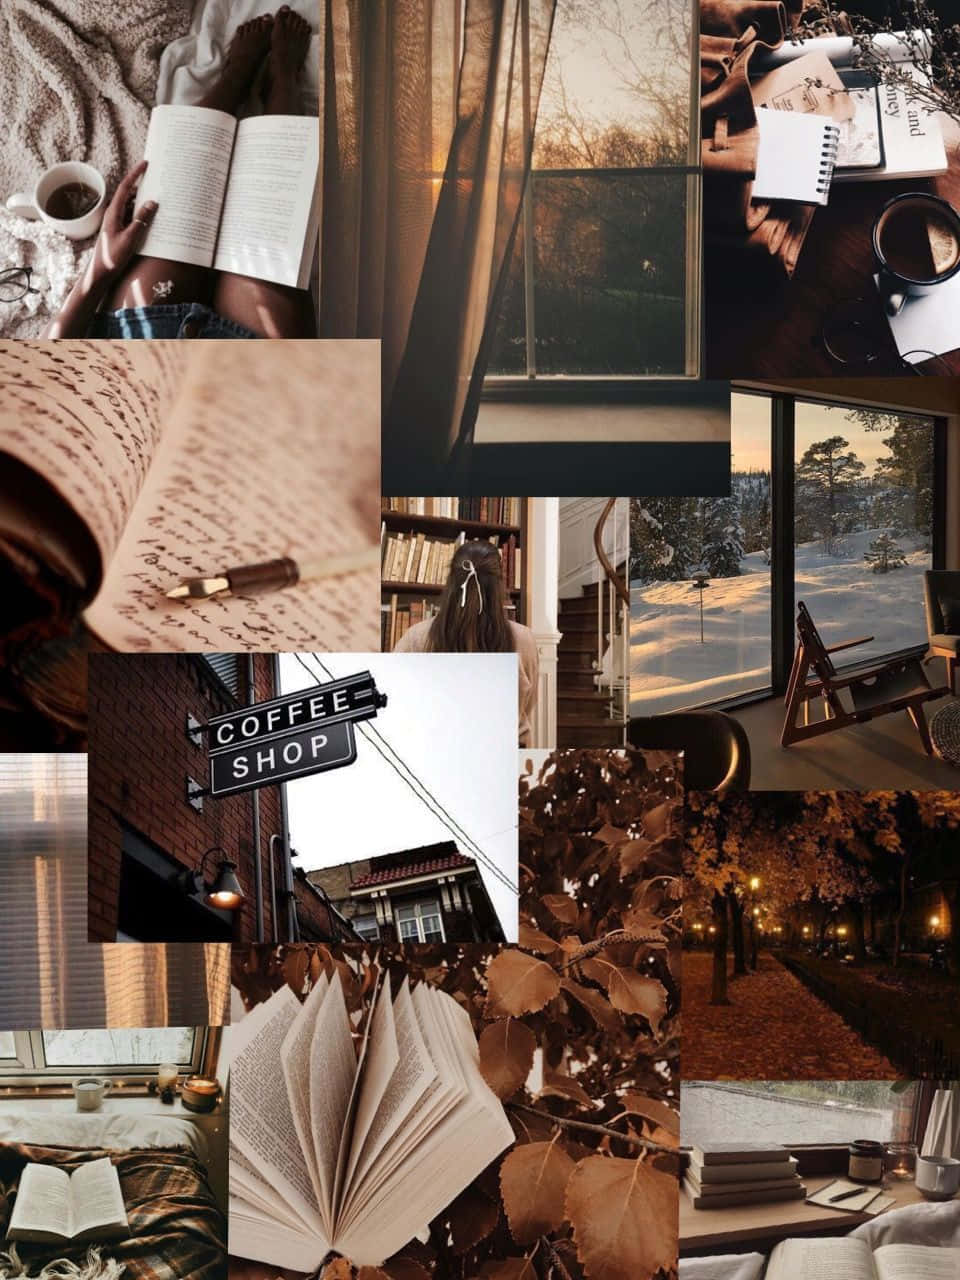 A Collage Of Photos Of Books, Books, And A Book Wallpaper